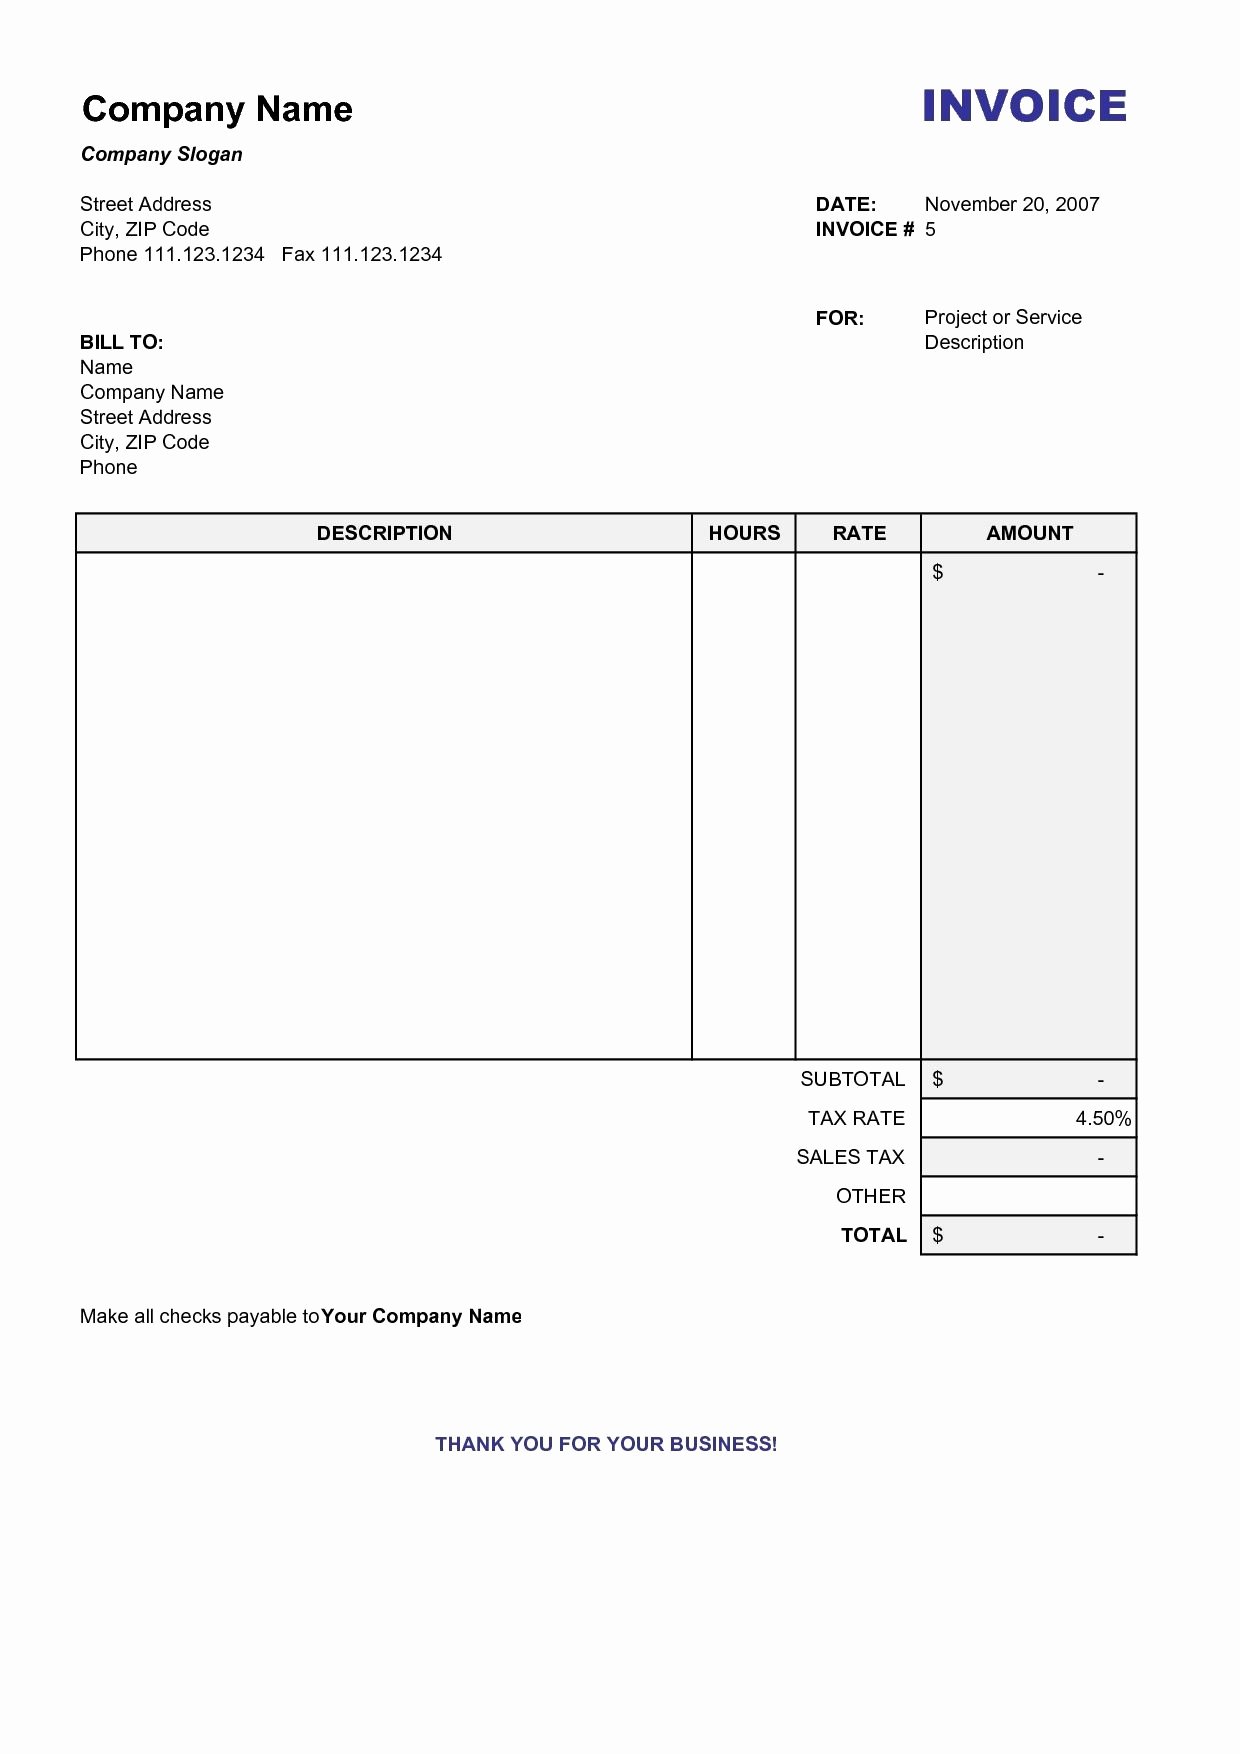 Invoice and Receipt Template Best Of Copy Of A Blank Invoice Invoice Template Free 2016 Copy Of